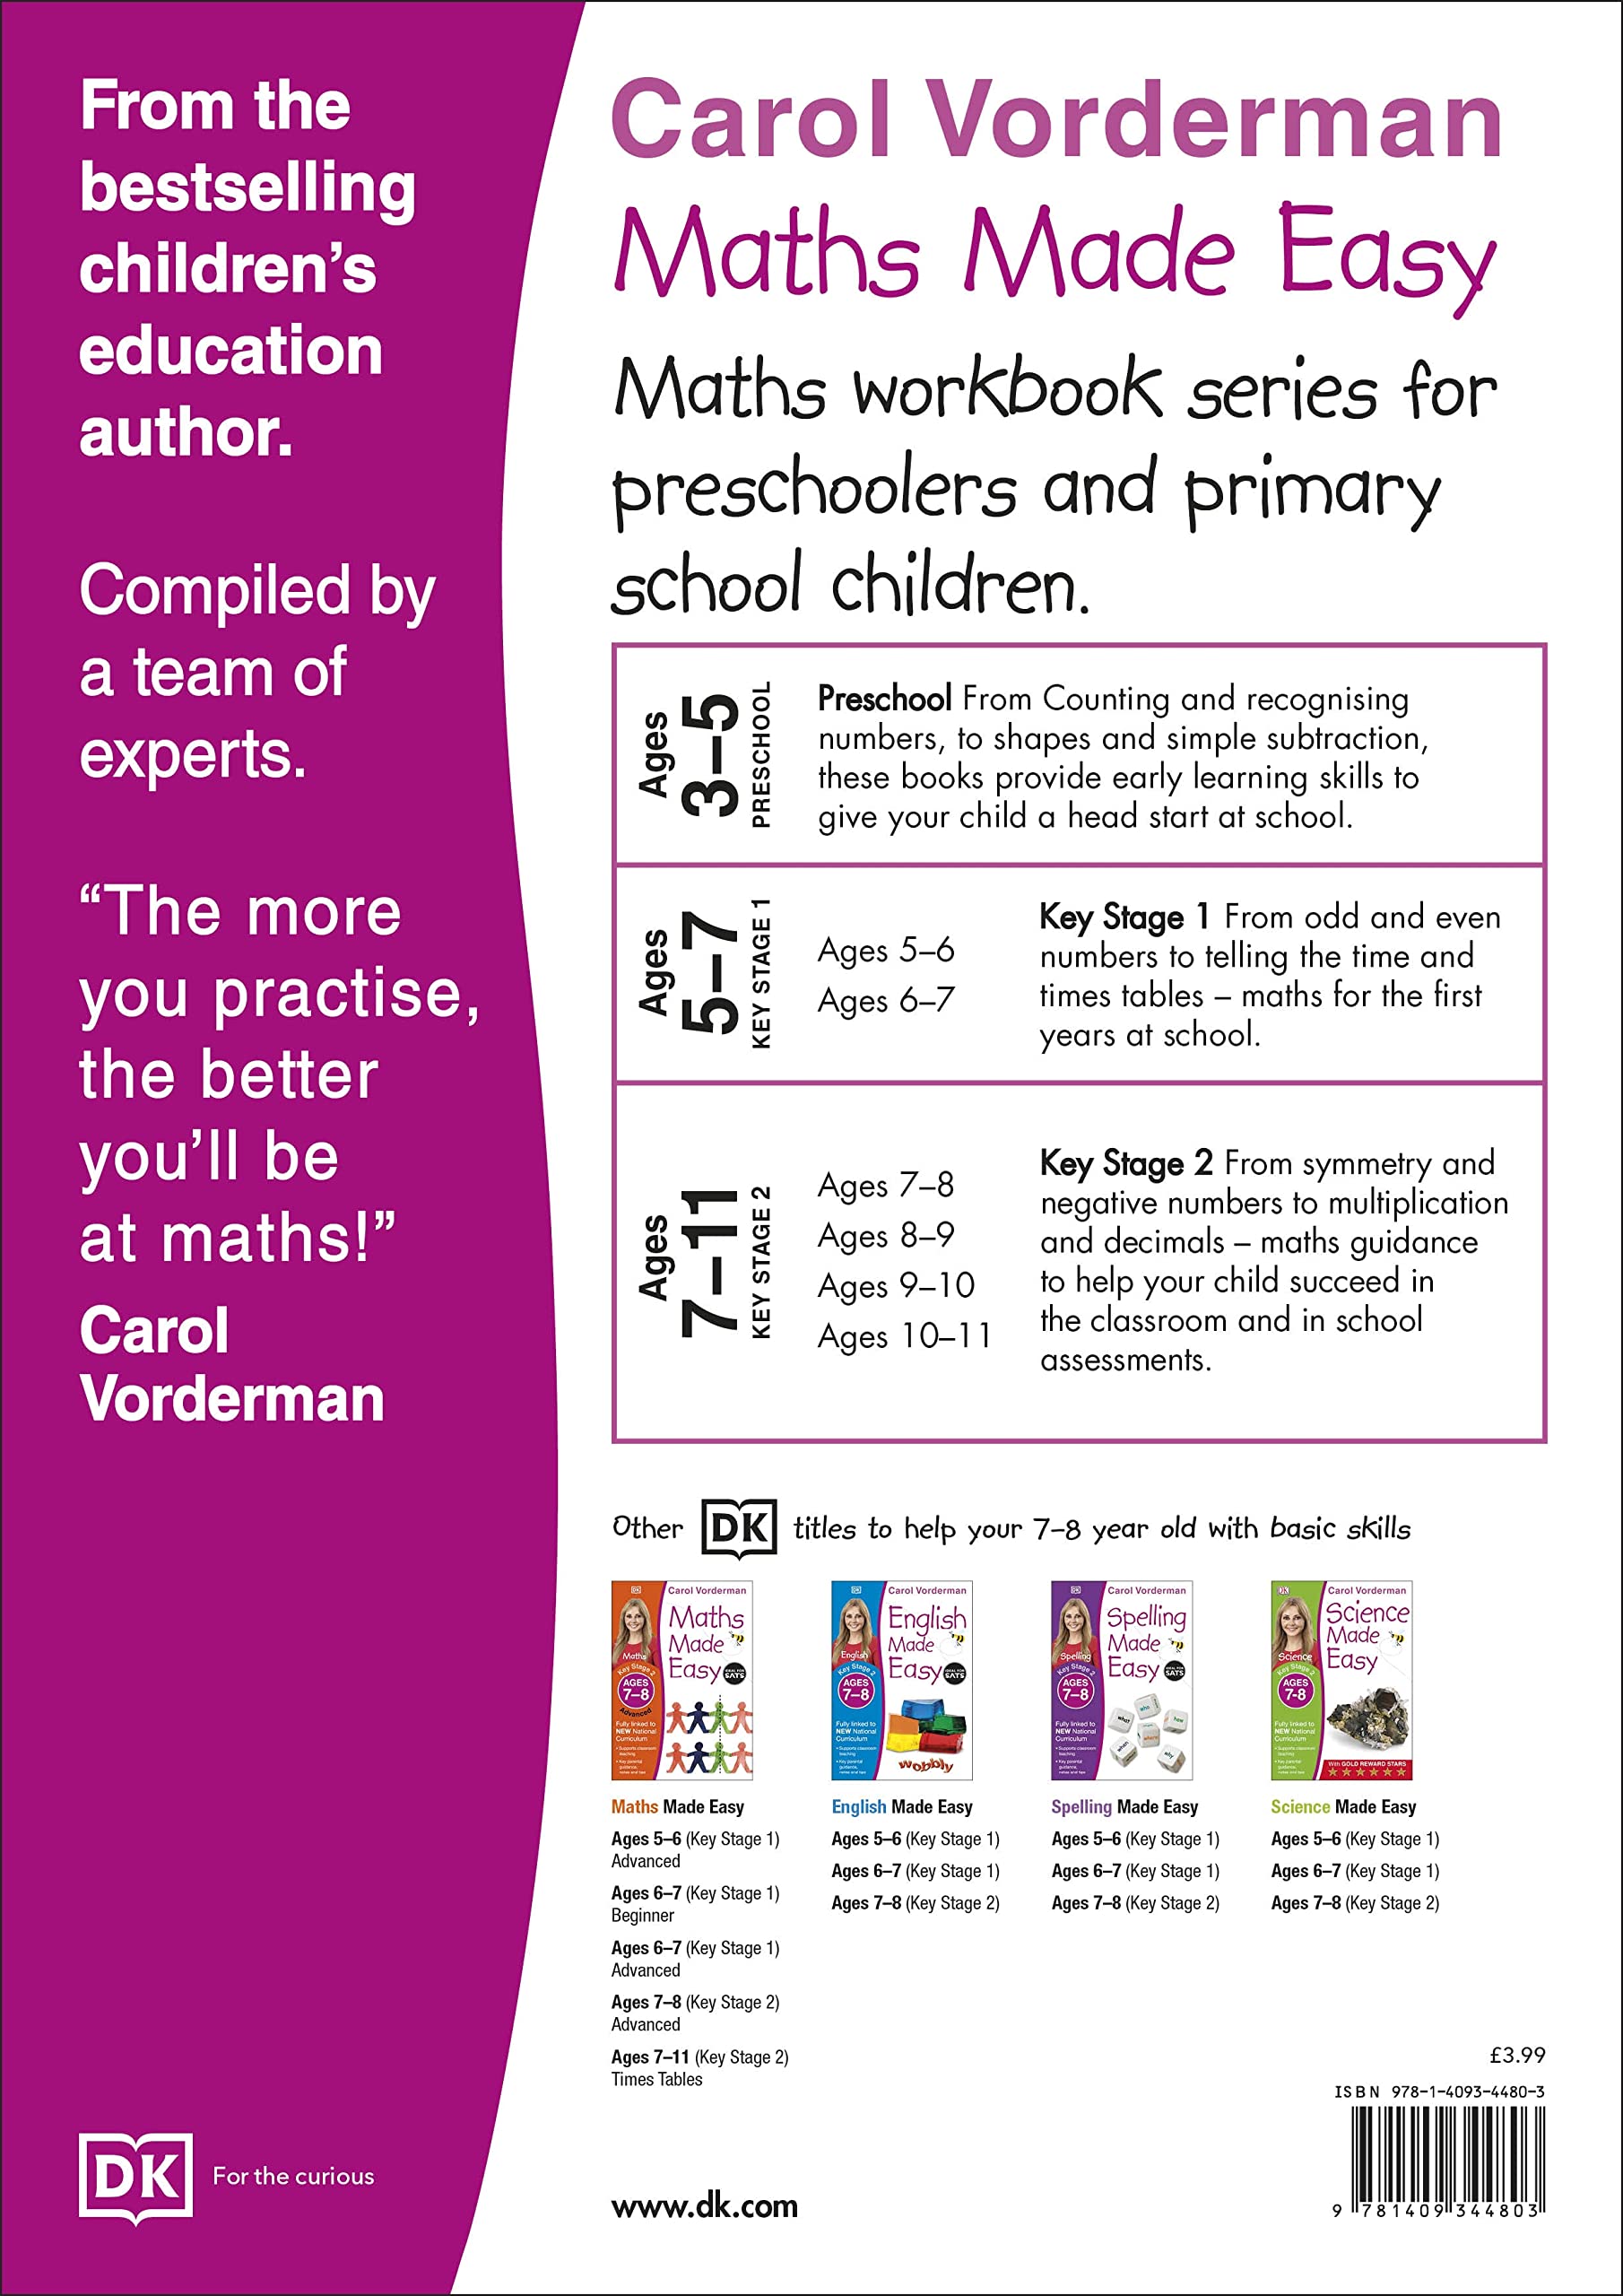 Maths Made Easy: Beginner, Ages 7-8 (Key Stage 2)